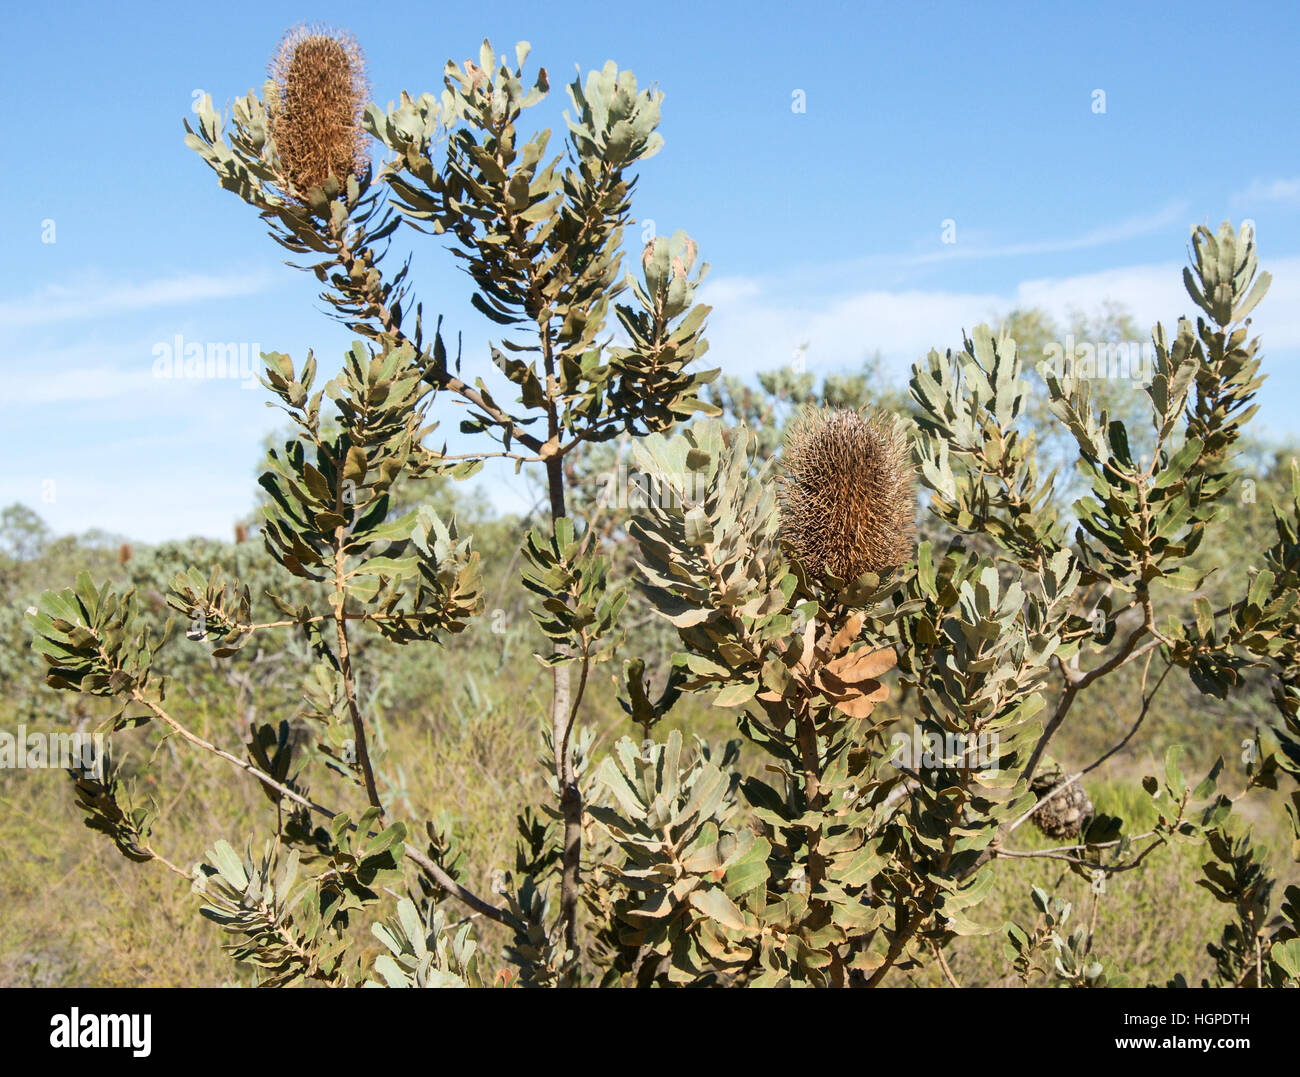 Uncultivated wild Banksia bush with dried pendants and green foliage in native bushland in Kalbarri, Western Australia. Stock Photo